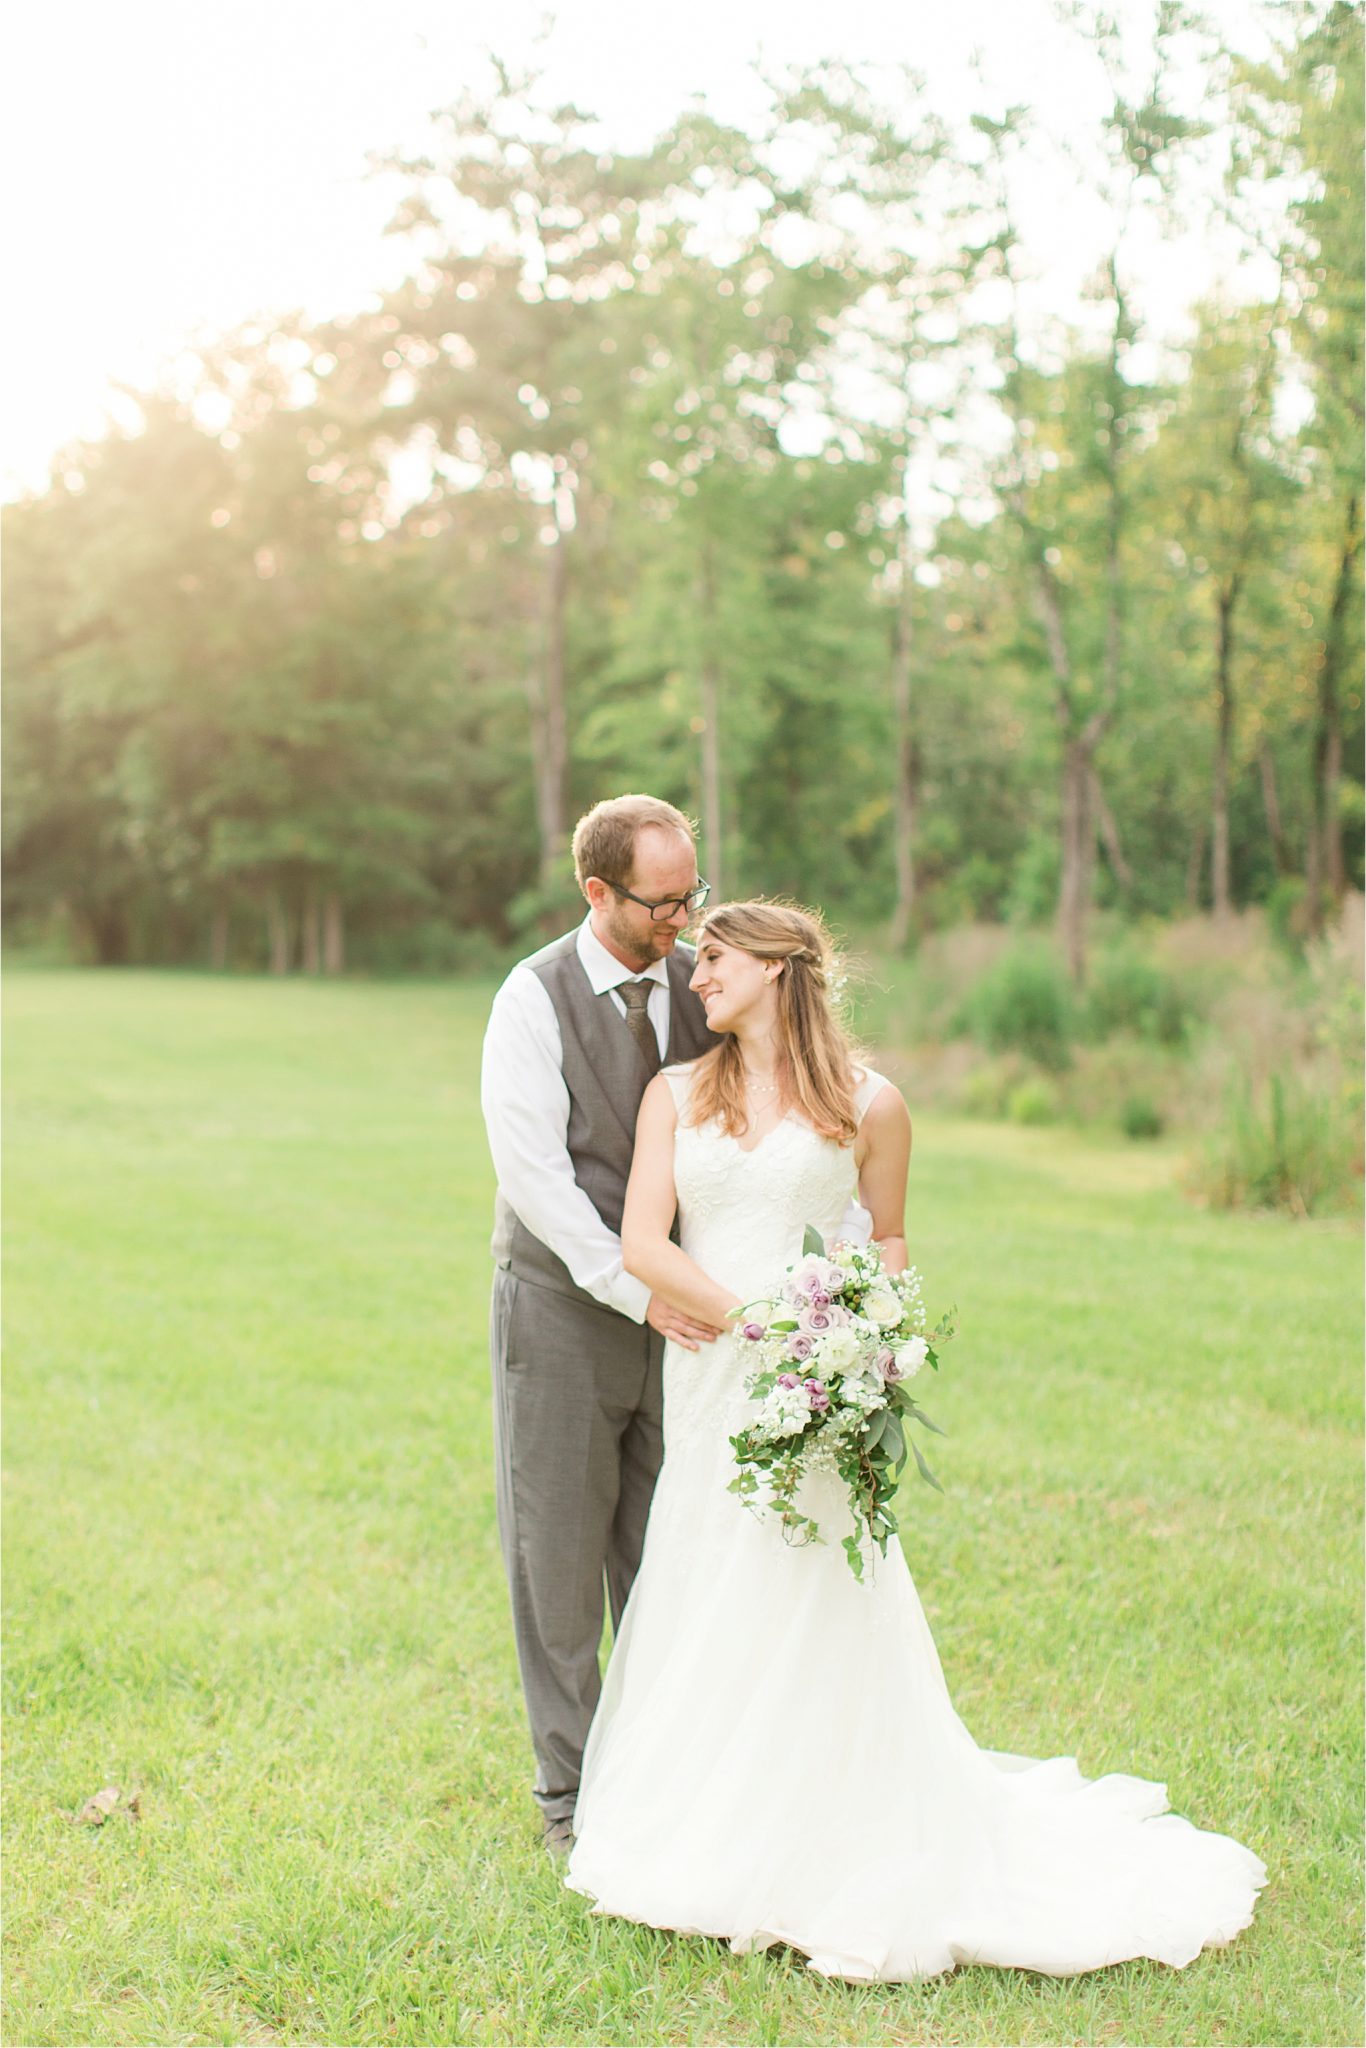 photos of the bride and groom-grey suit-groom in vest-lavender bouquet-backyard country wedding